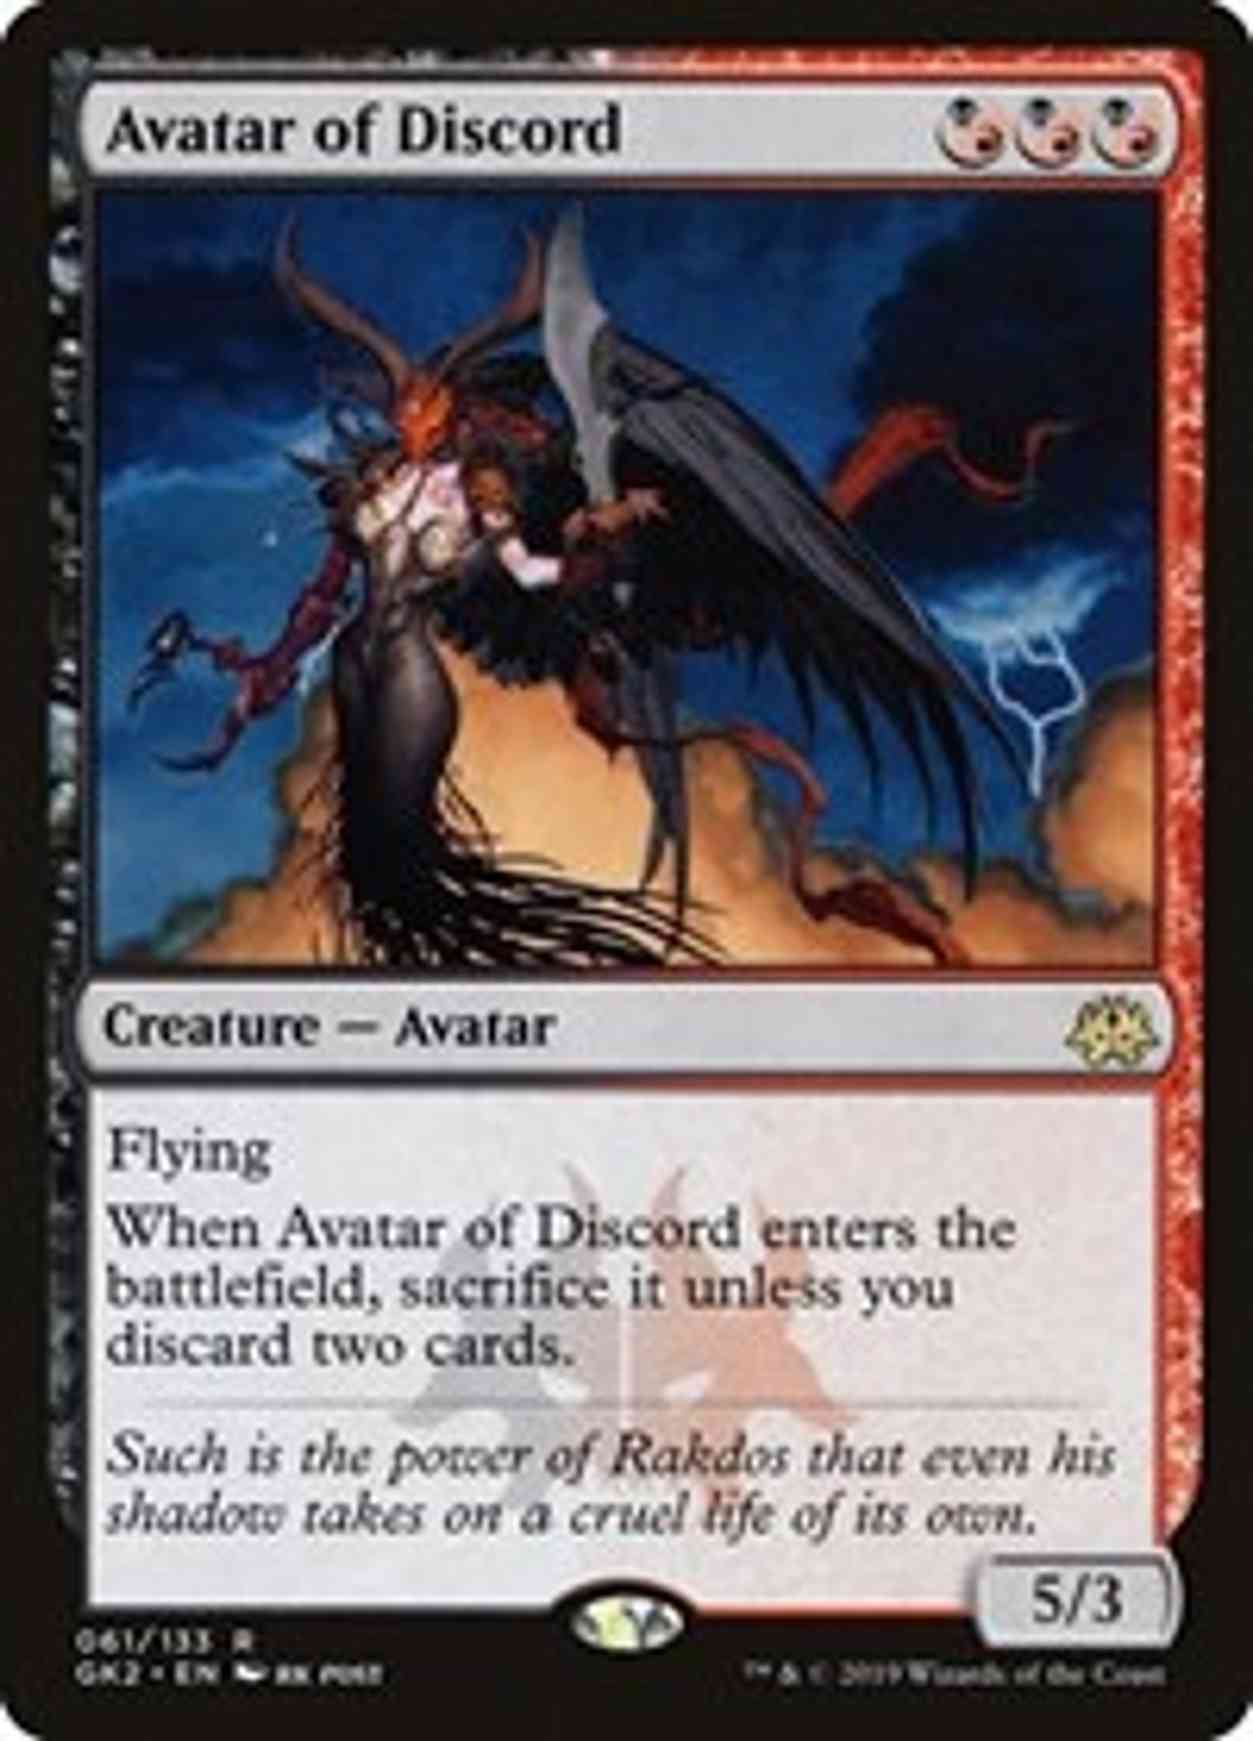 Avatar of Discord magic card front